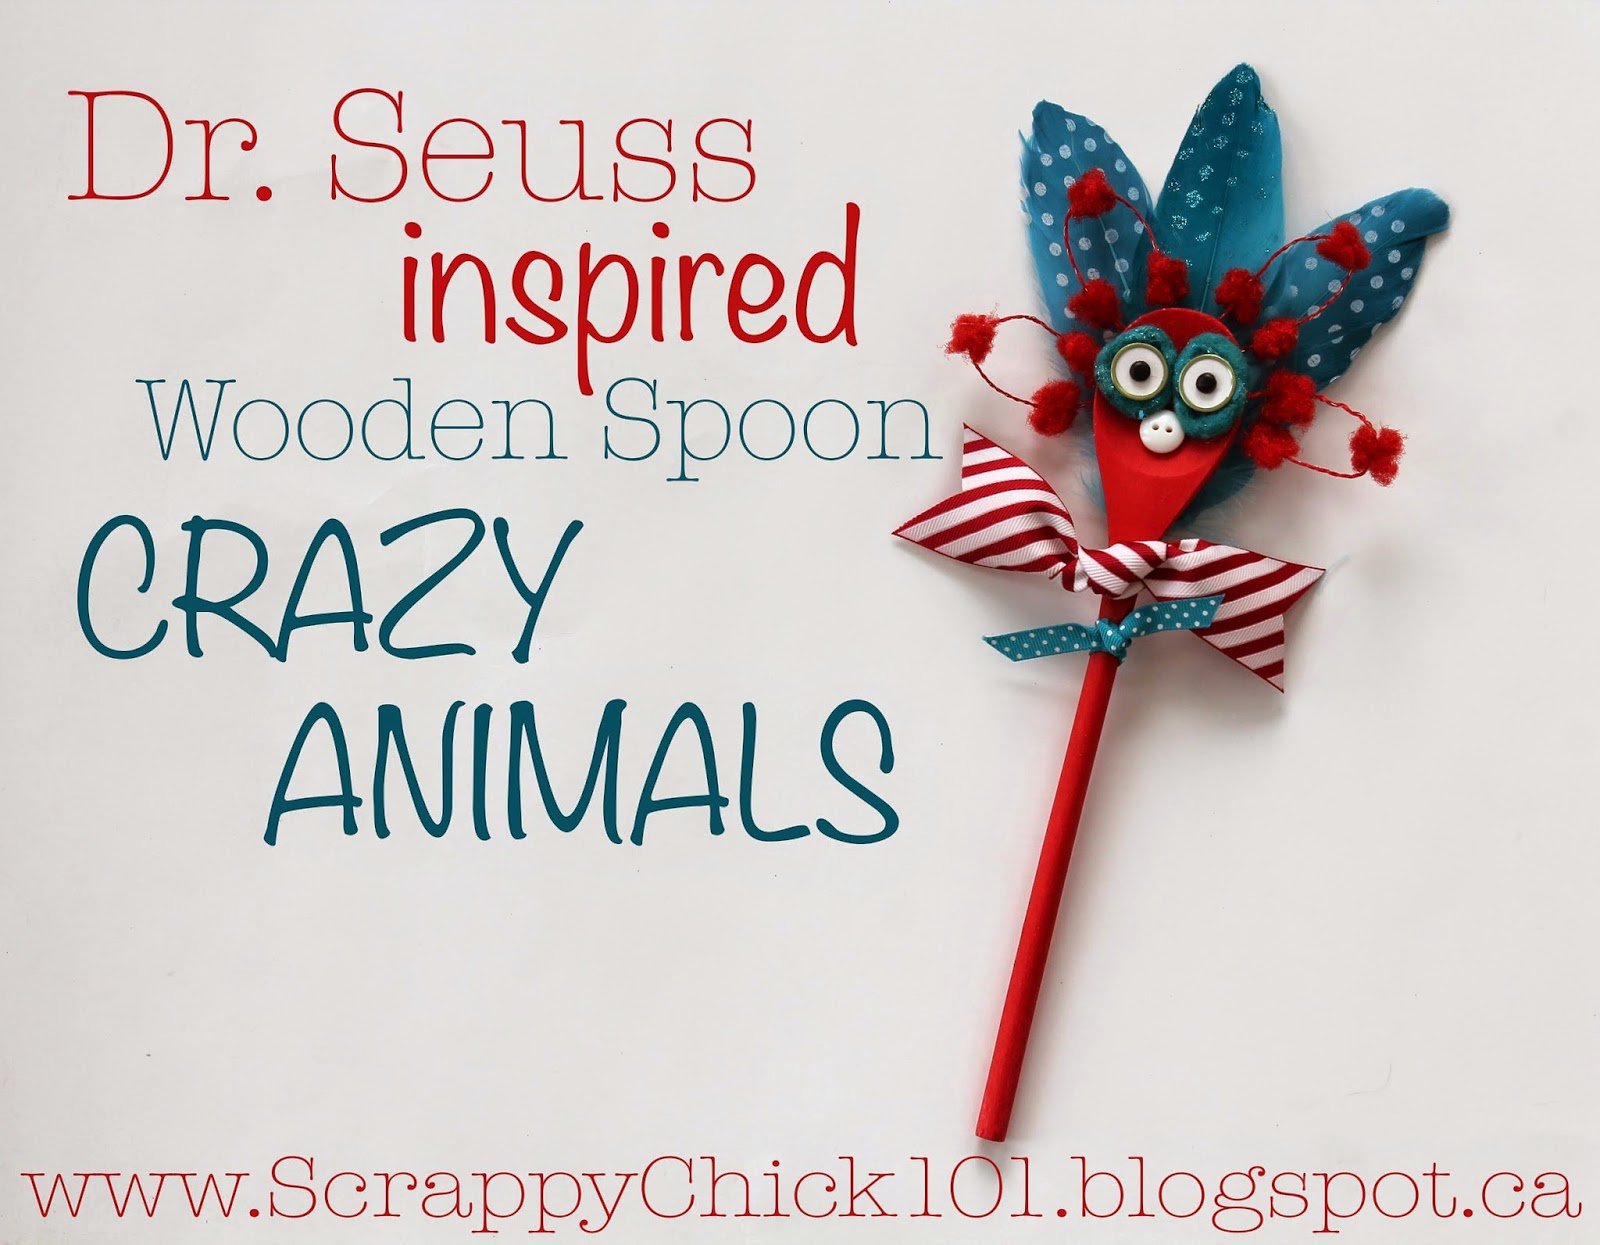 Tons of quick and easy Dr. Seuss crafts that take 15 minutes or less to make!